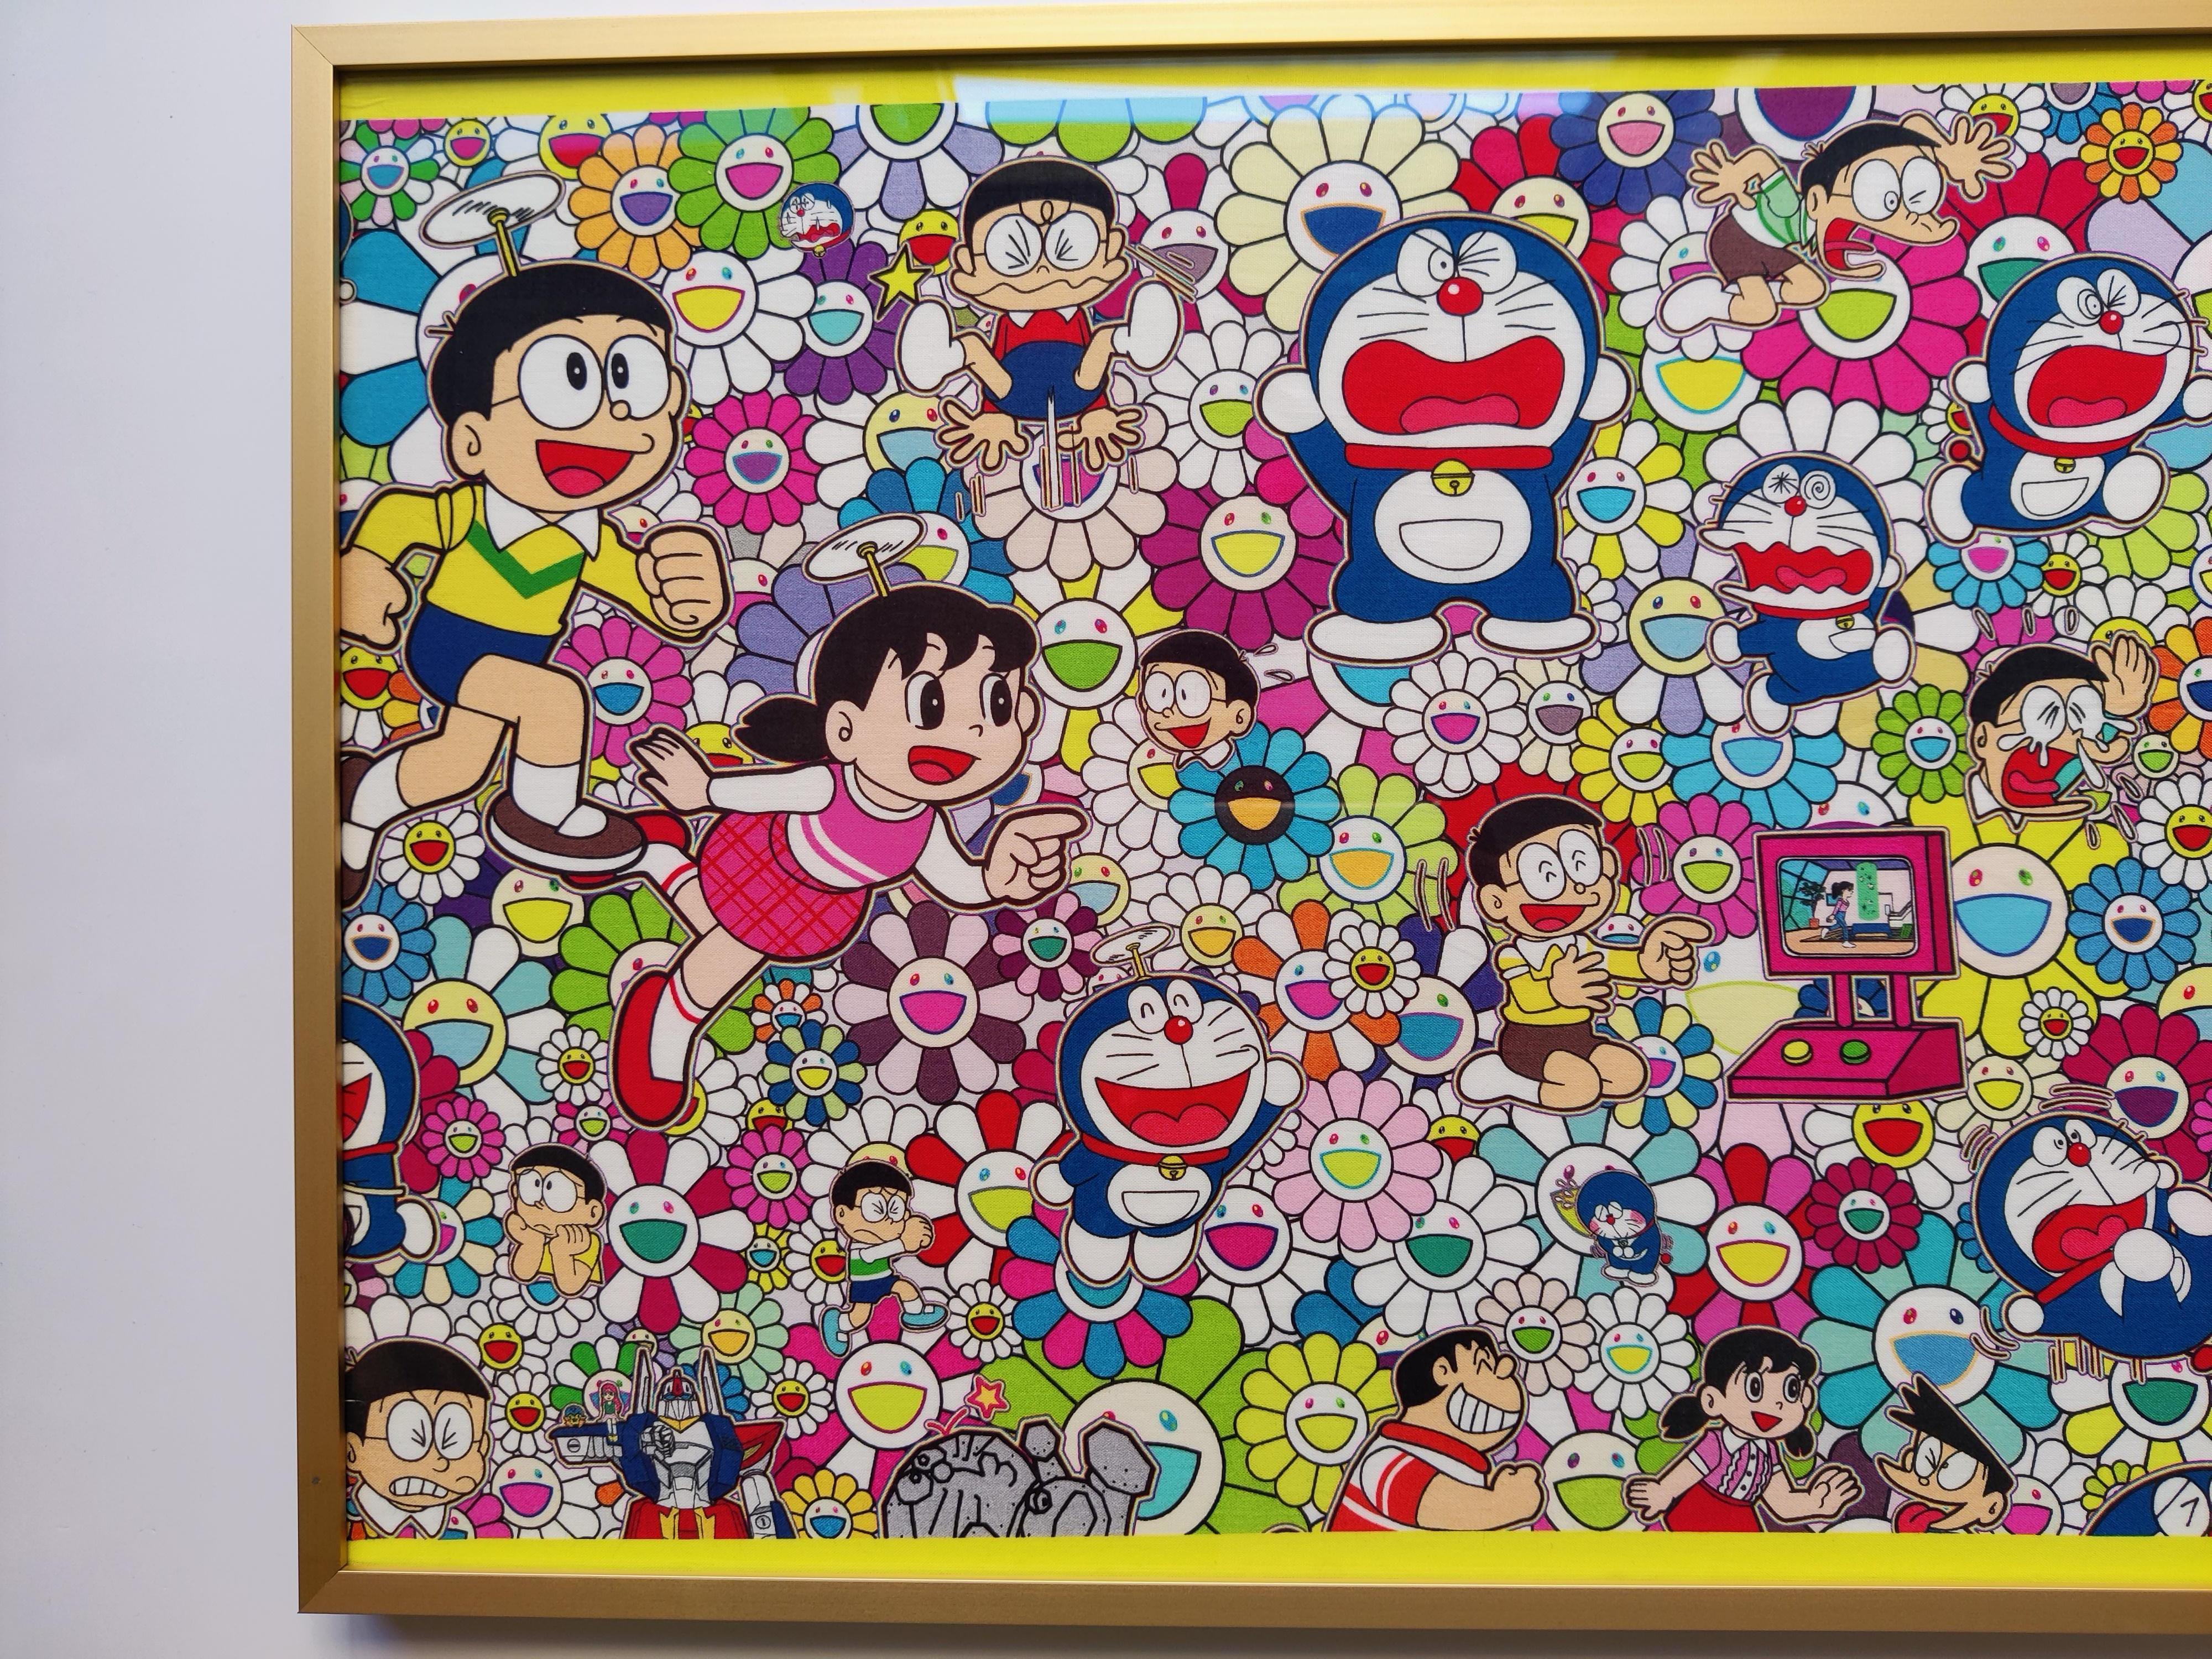 Takashi Murakami  x Doraemon 

Limited Edition for Exhibition Tokyo 2017

Material: 100% Cotton

Dimension: 89.5 x 32.5cm

Frame Dimension:  91.6 x 36.5 x 2.5 cm

Framed with the golden aluminium frame and UV-protected acrylic glass.